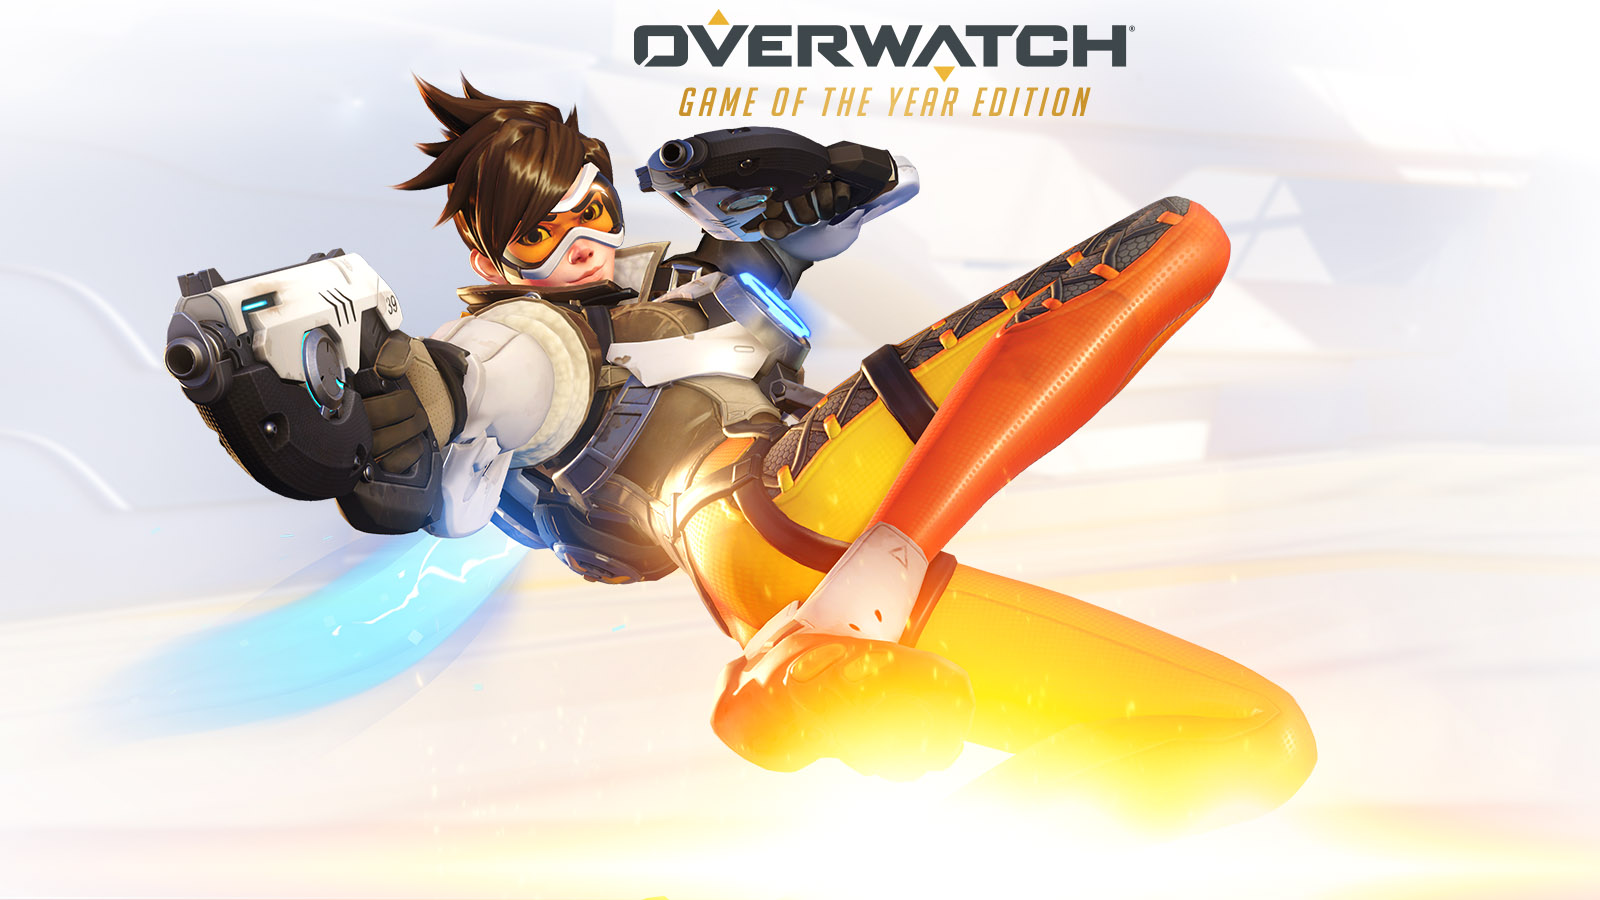 overwatch-game-of-the-year-edition-listing-thumb-01-ps4-us-23may17